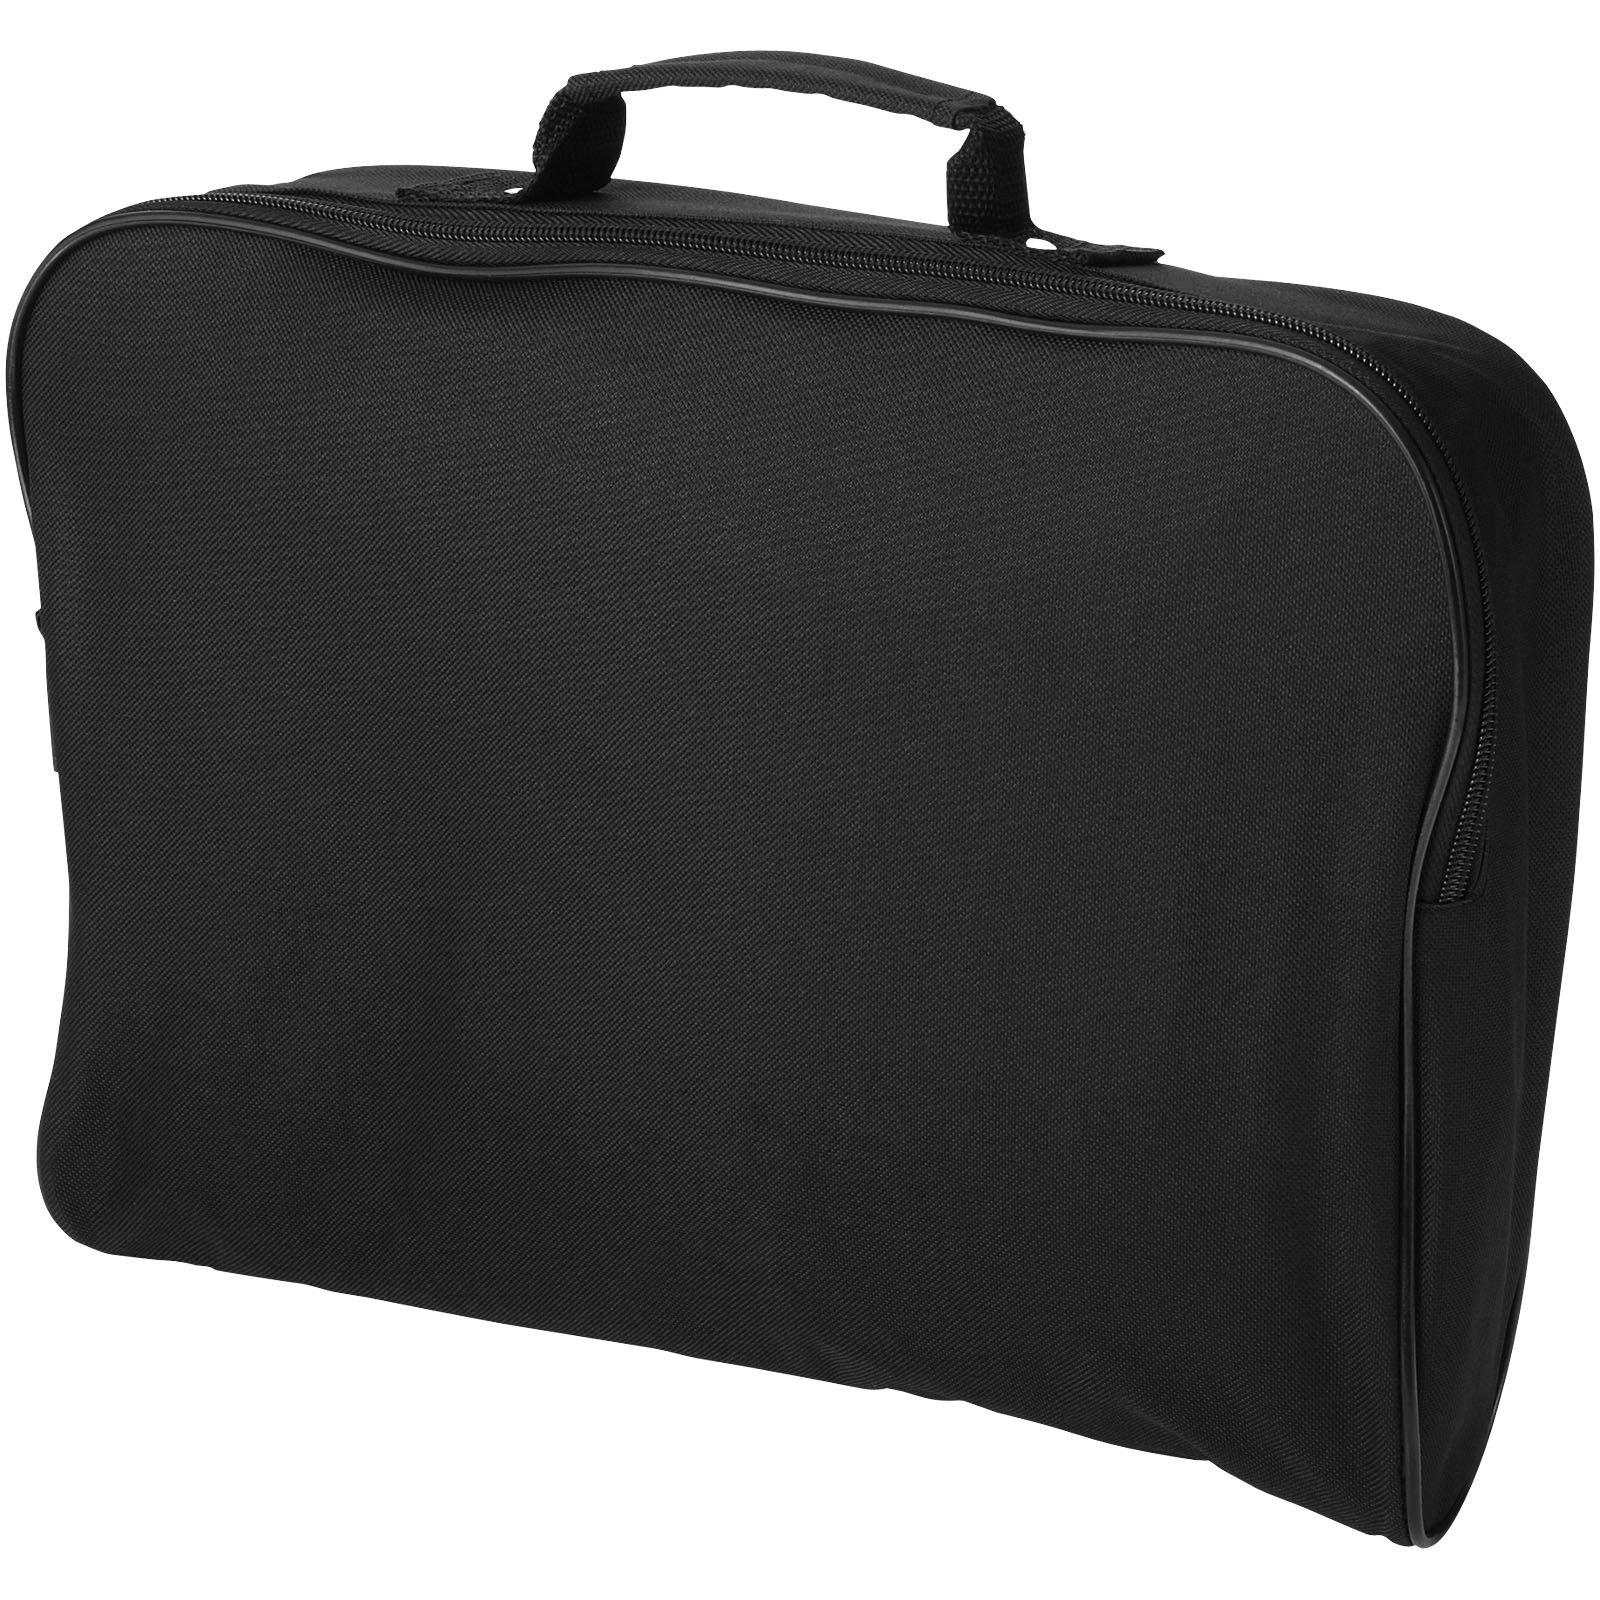 Advertising Conference bags - Florida conference bag 7L